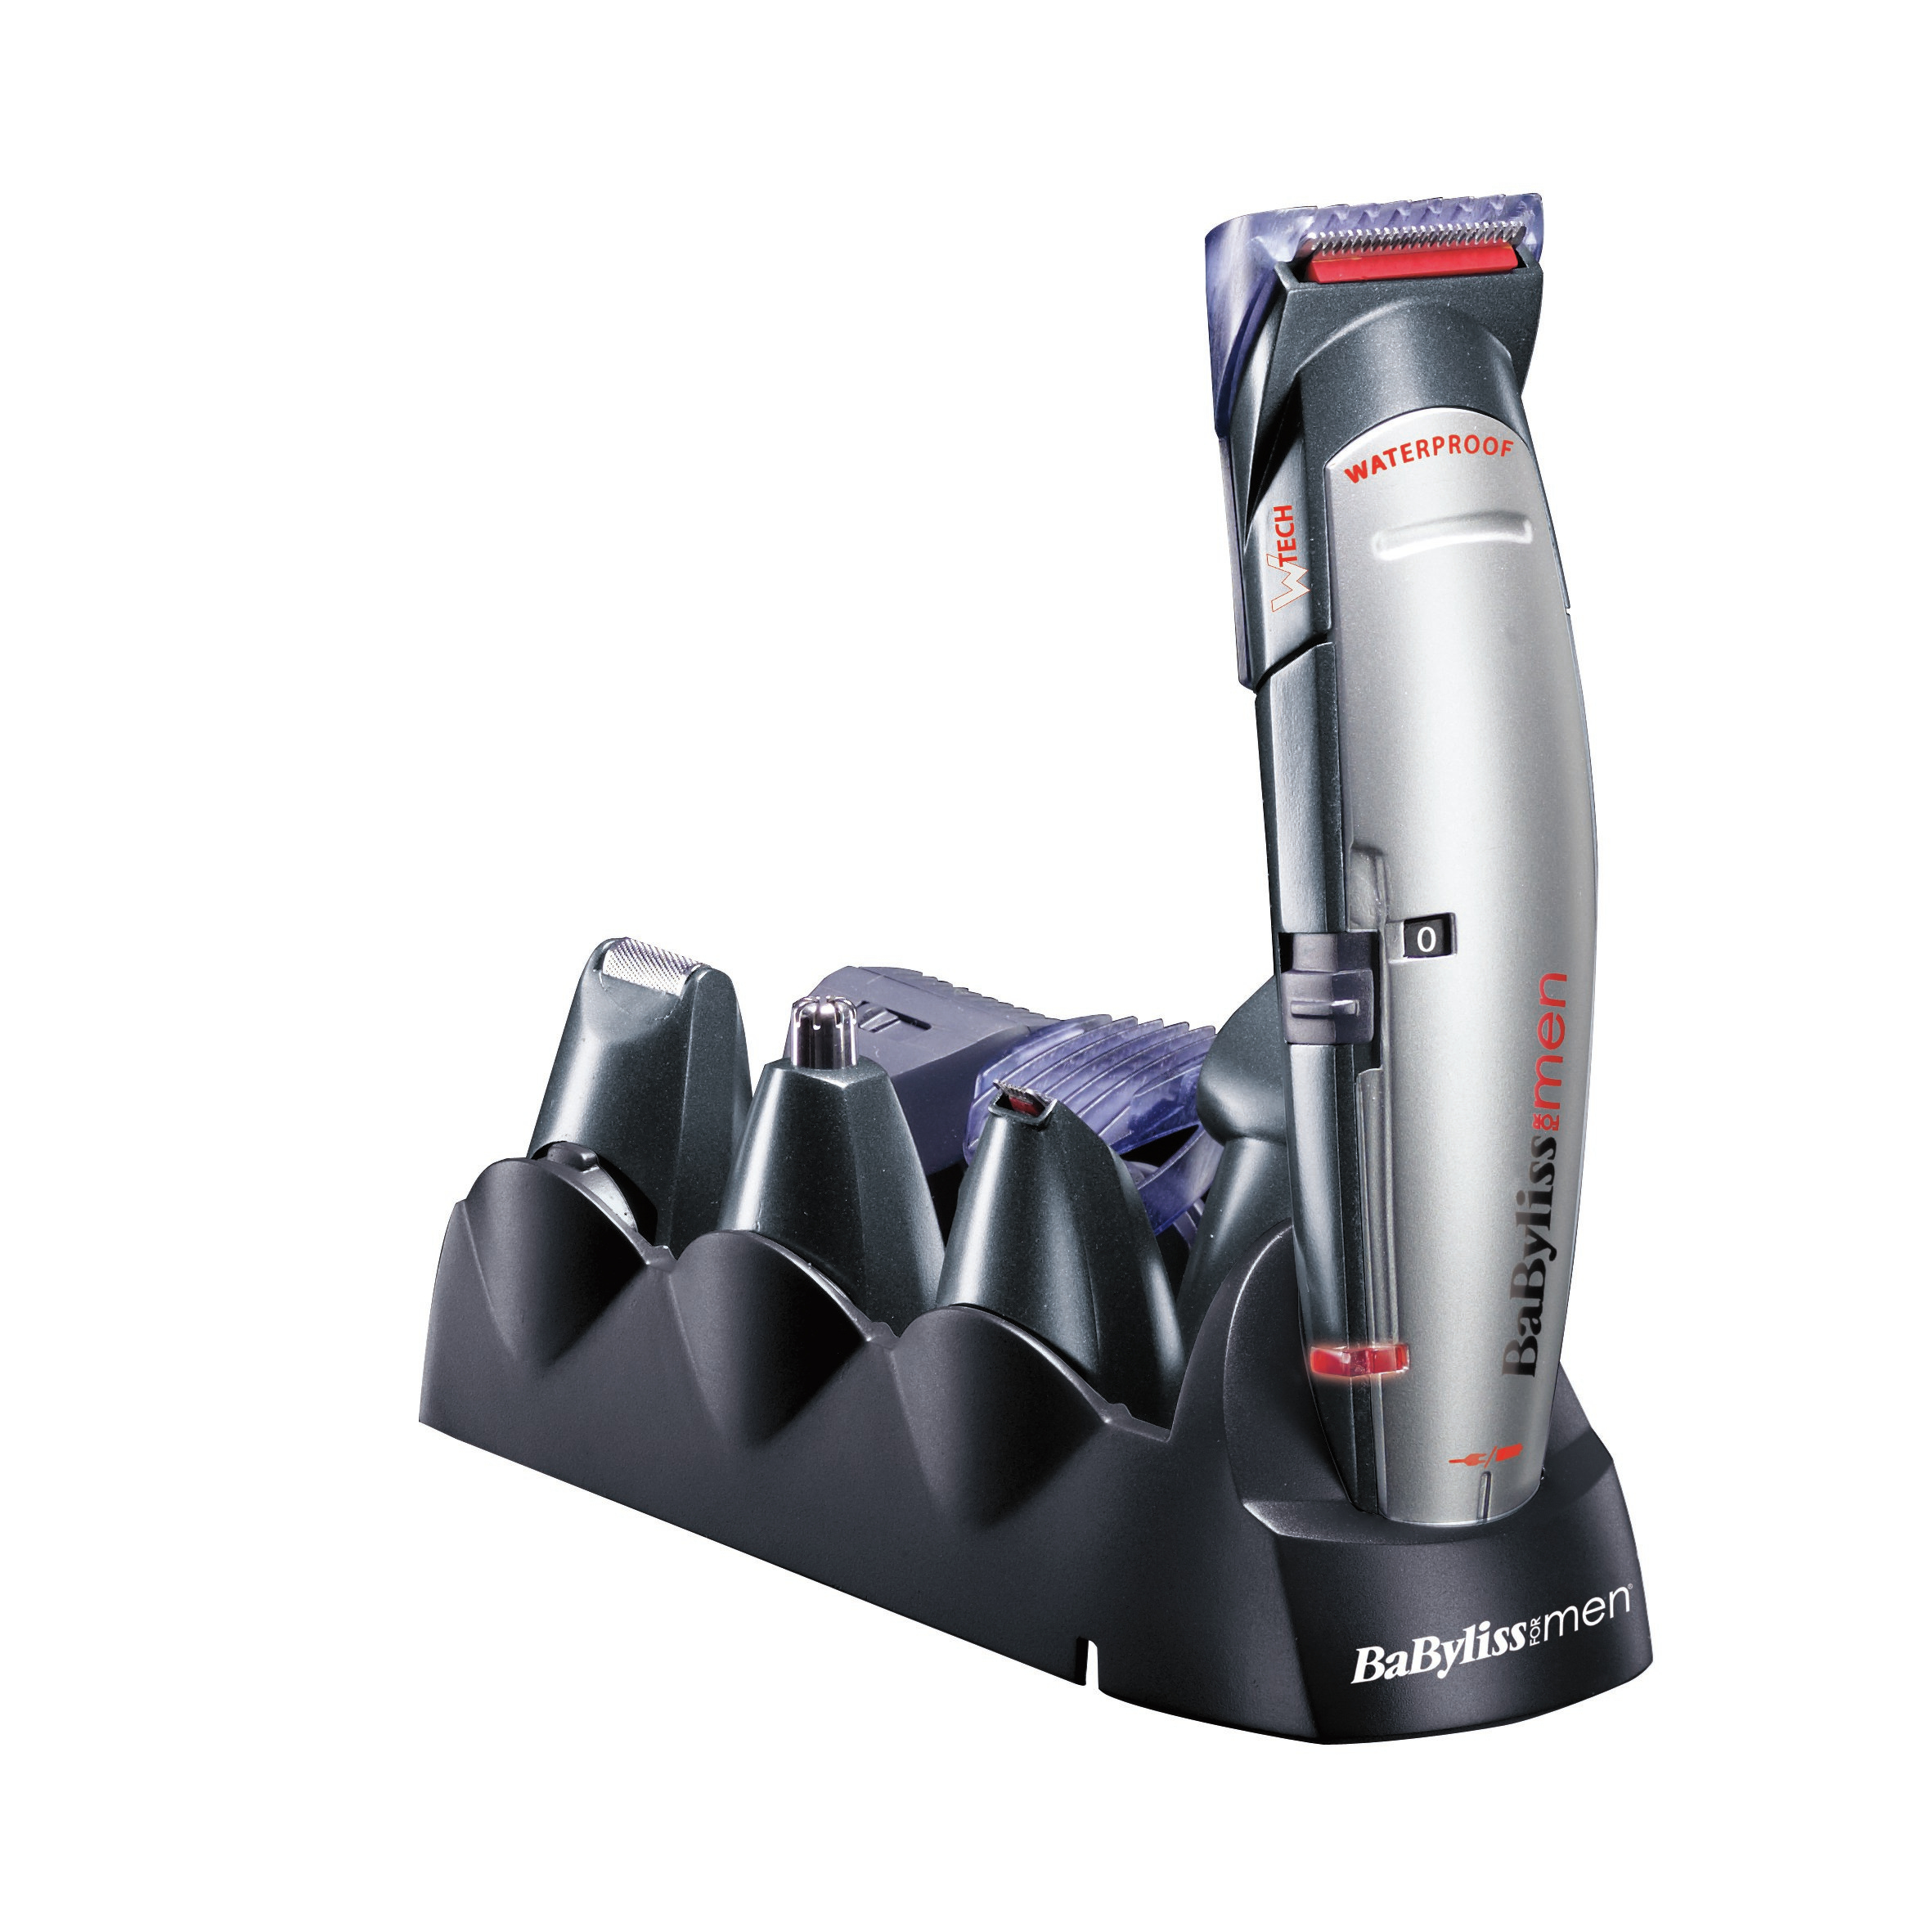 1 Babyliss in Multifunktionstrimmer W-tech 10